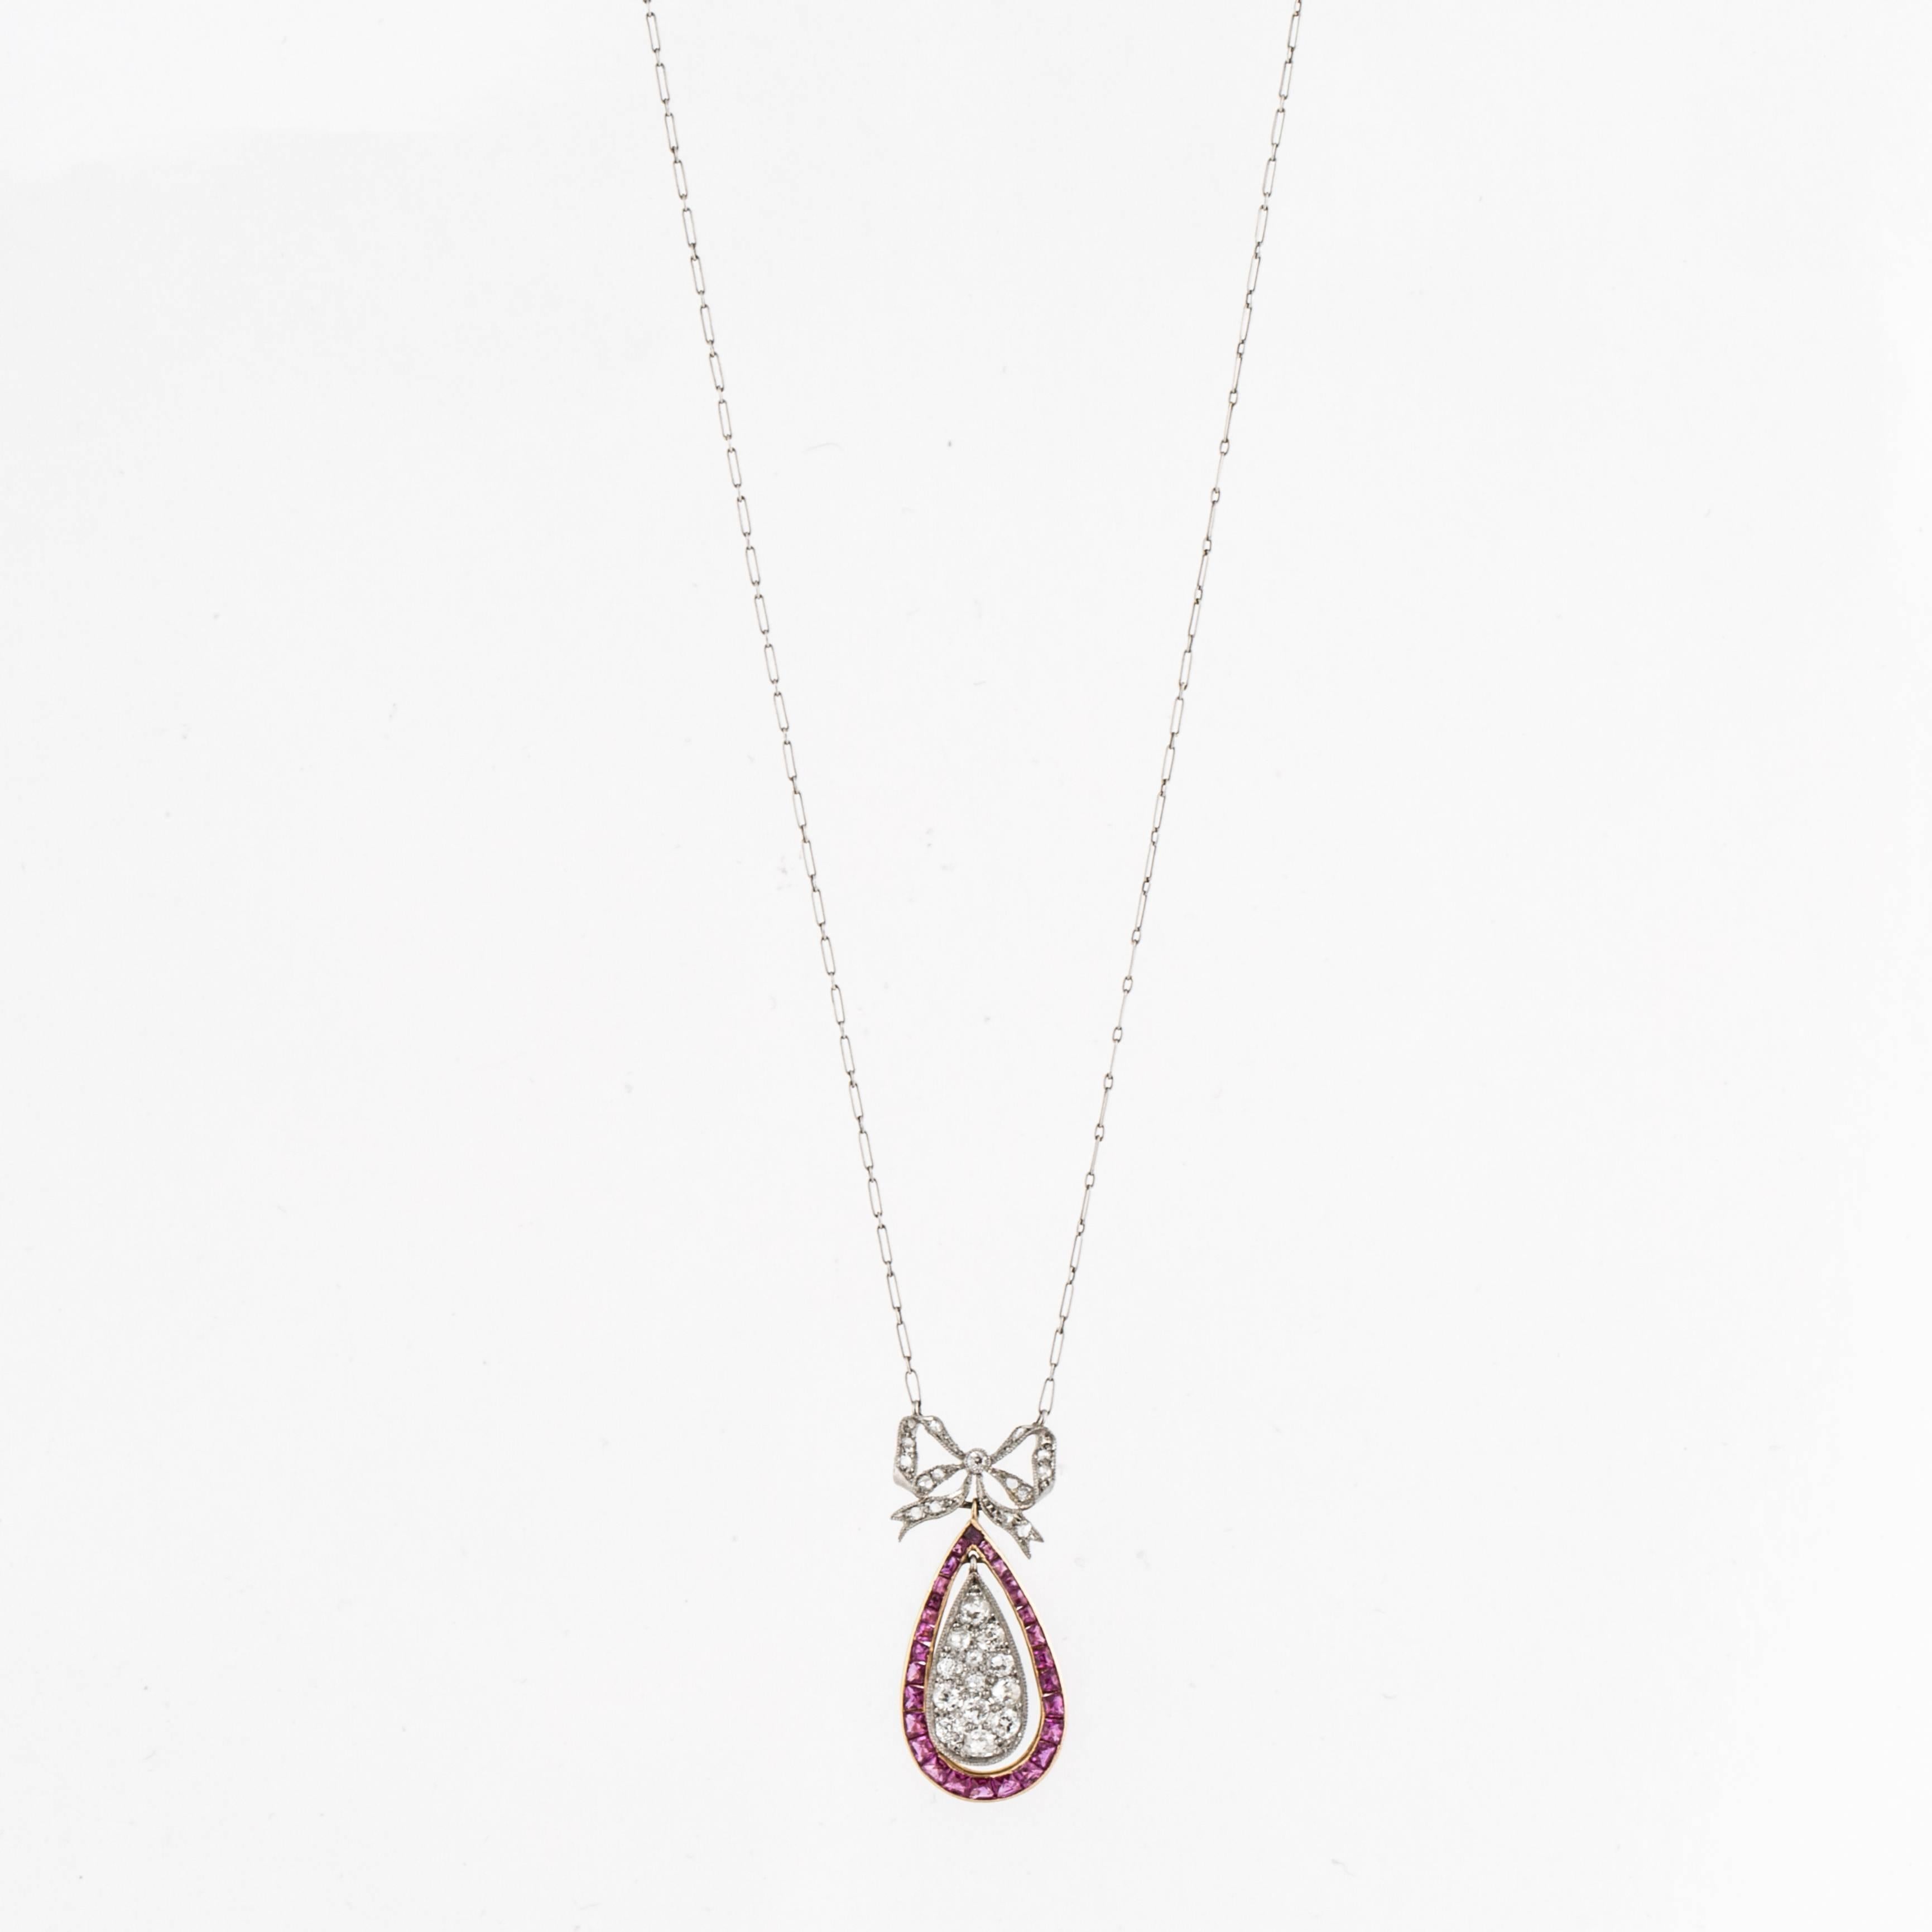 Belle Epoque platinum and 18K gold bead set diamond and calibré-cut ruby pendant necklace with French marks circa 1910.  There are 14 rose cut diamonds that total 0.14 carats and 14 single-cut diamonds that total 0.53 carats.  The diamonds are G-J